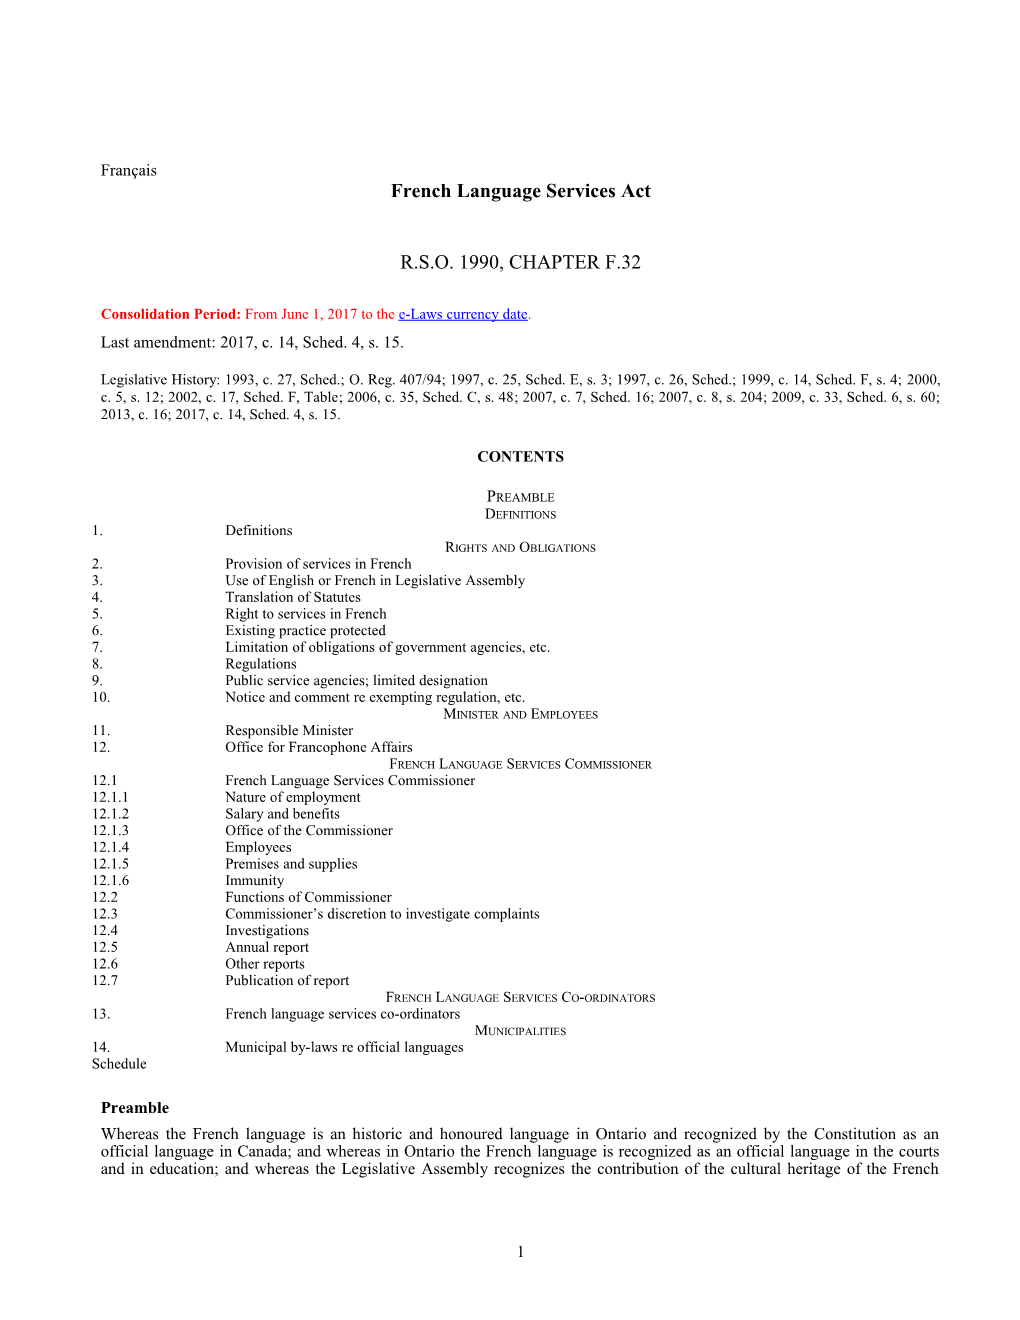 French Language Services Act, R.S.O. 1990, C. F.32